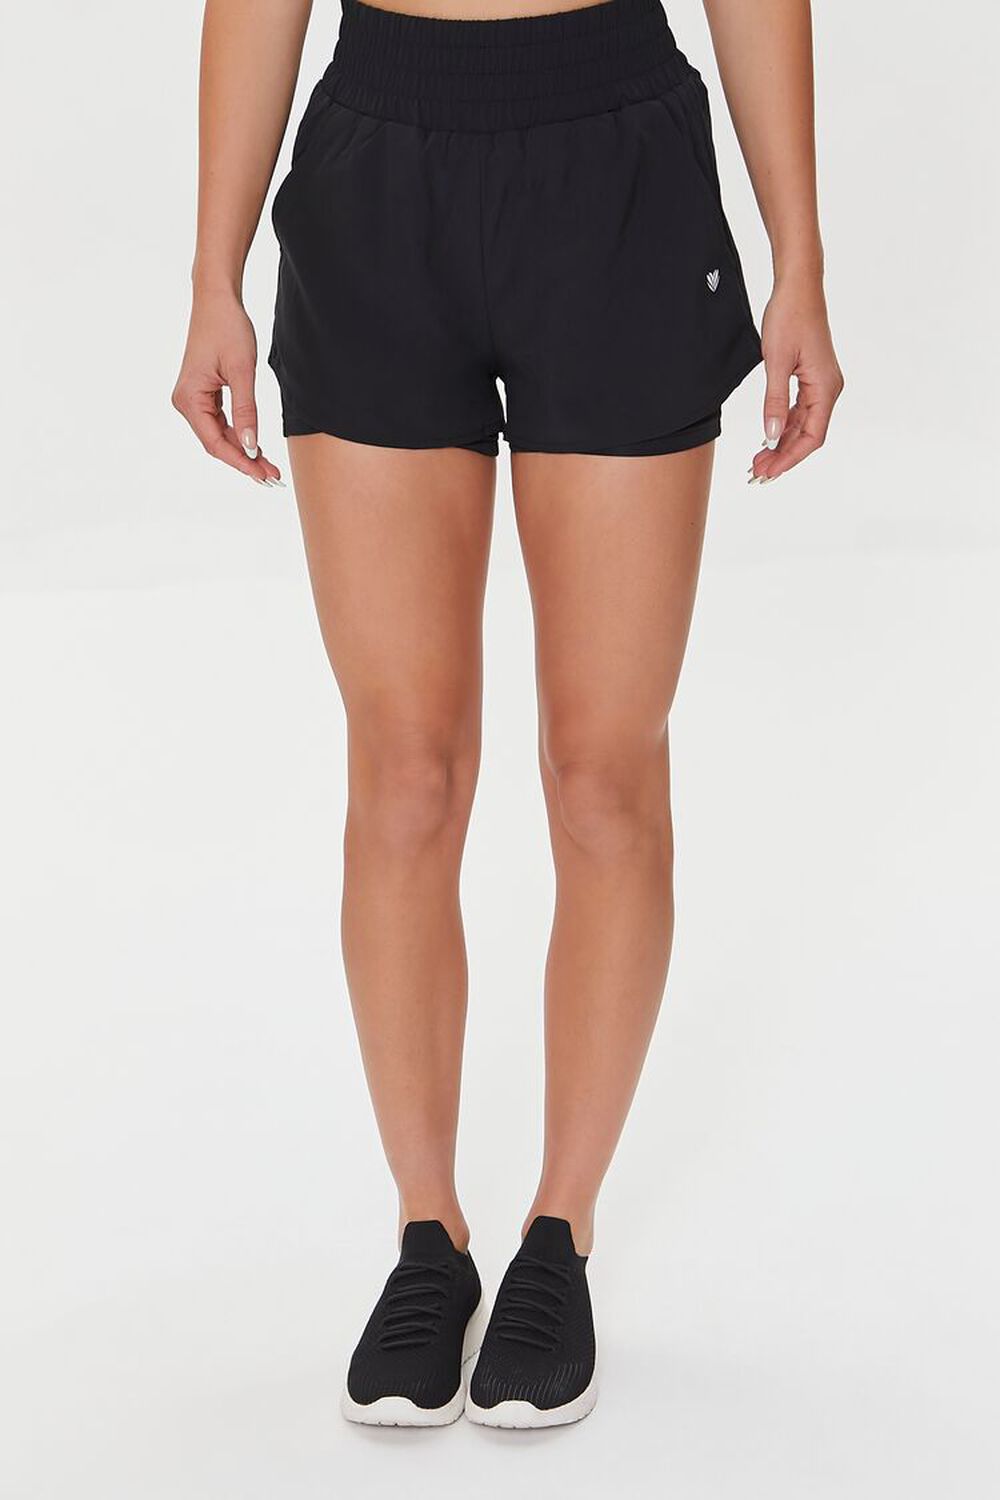 BLACK Active Lined Shorts, image 2